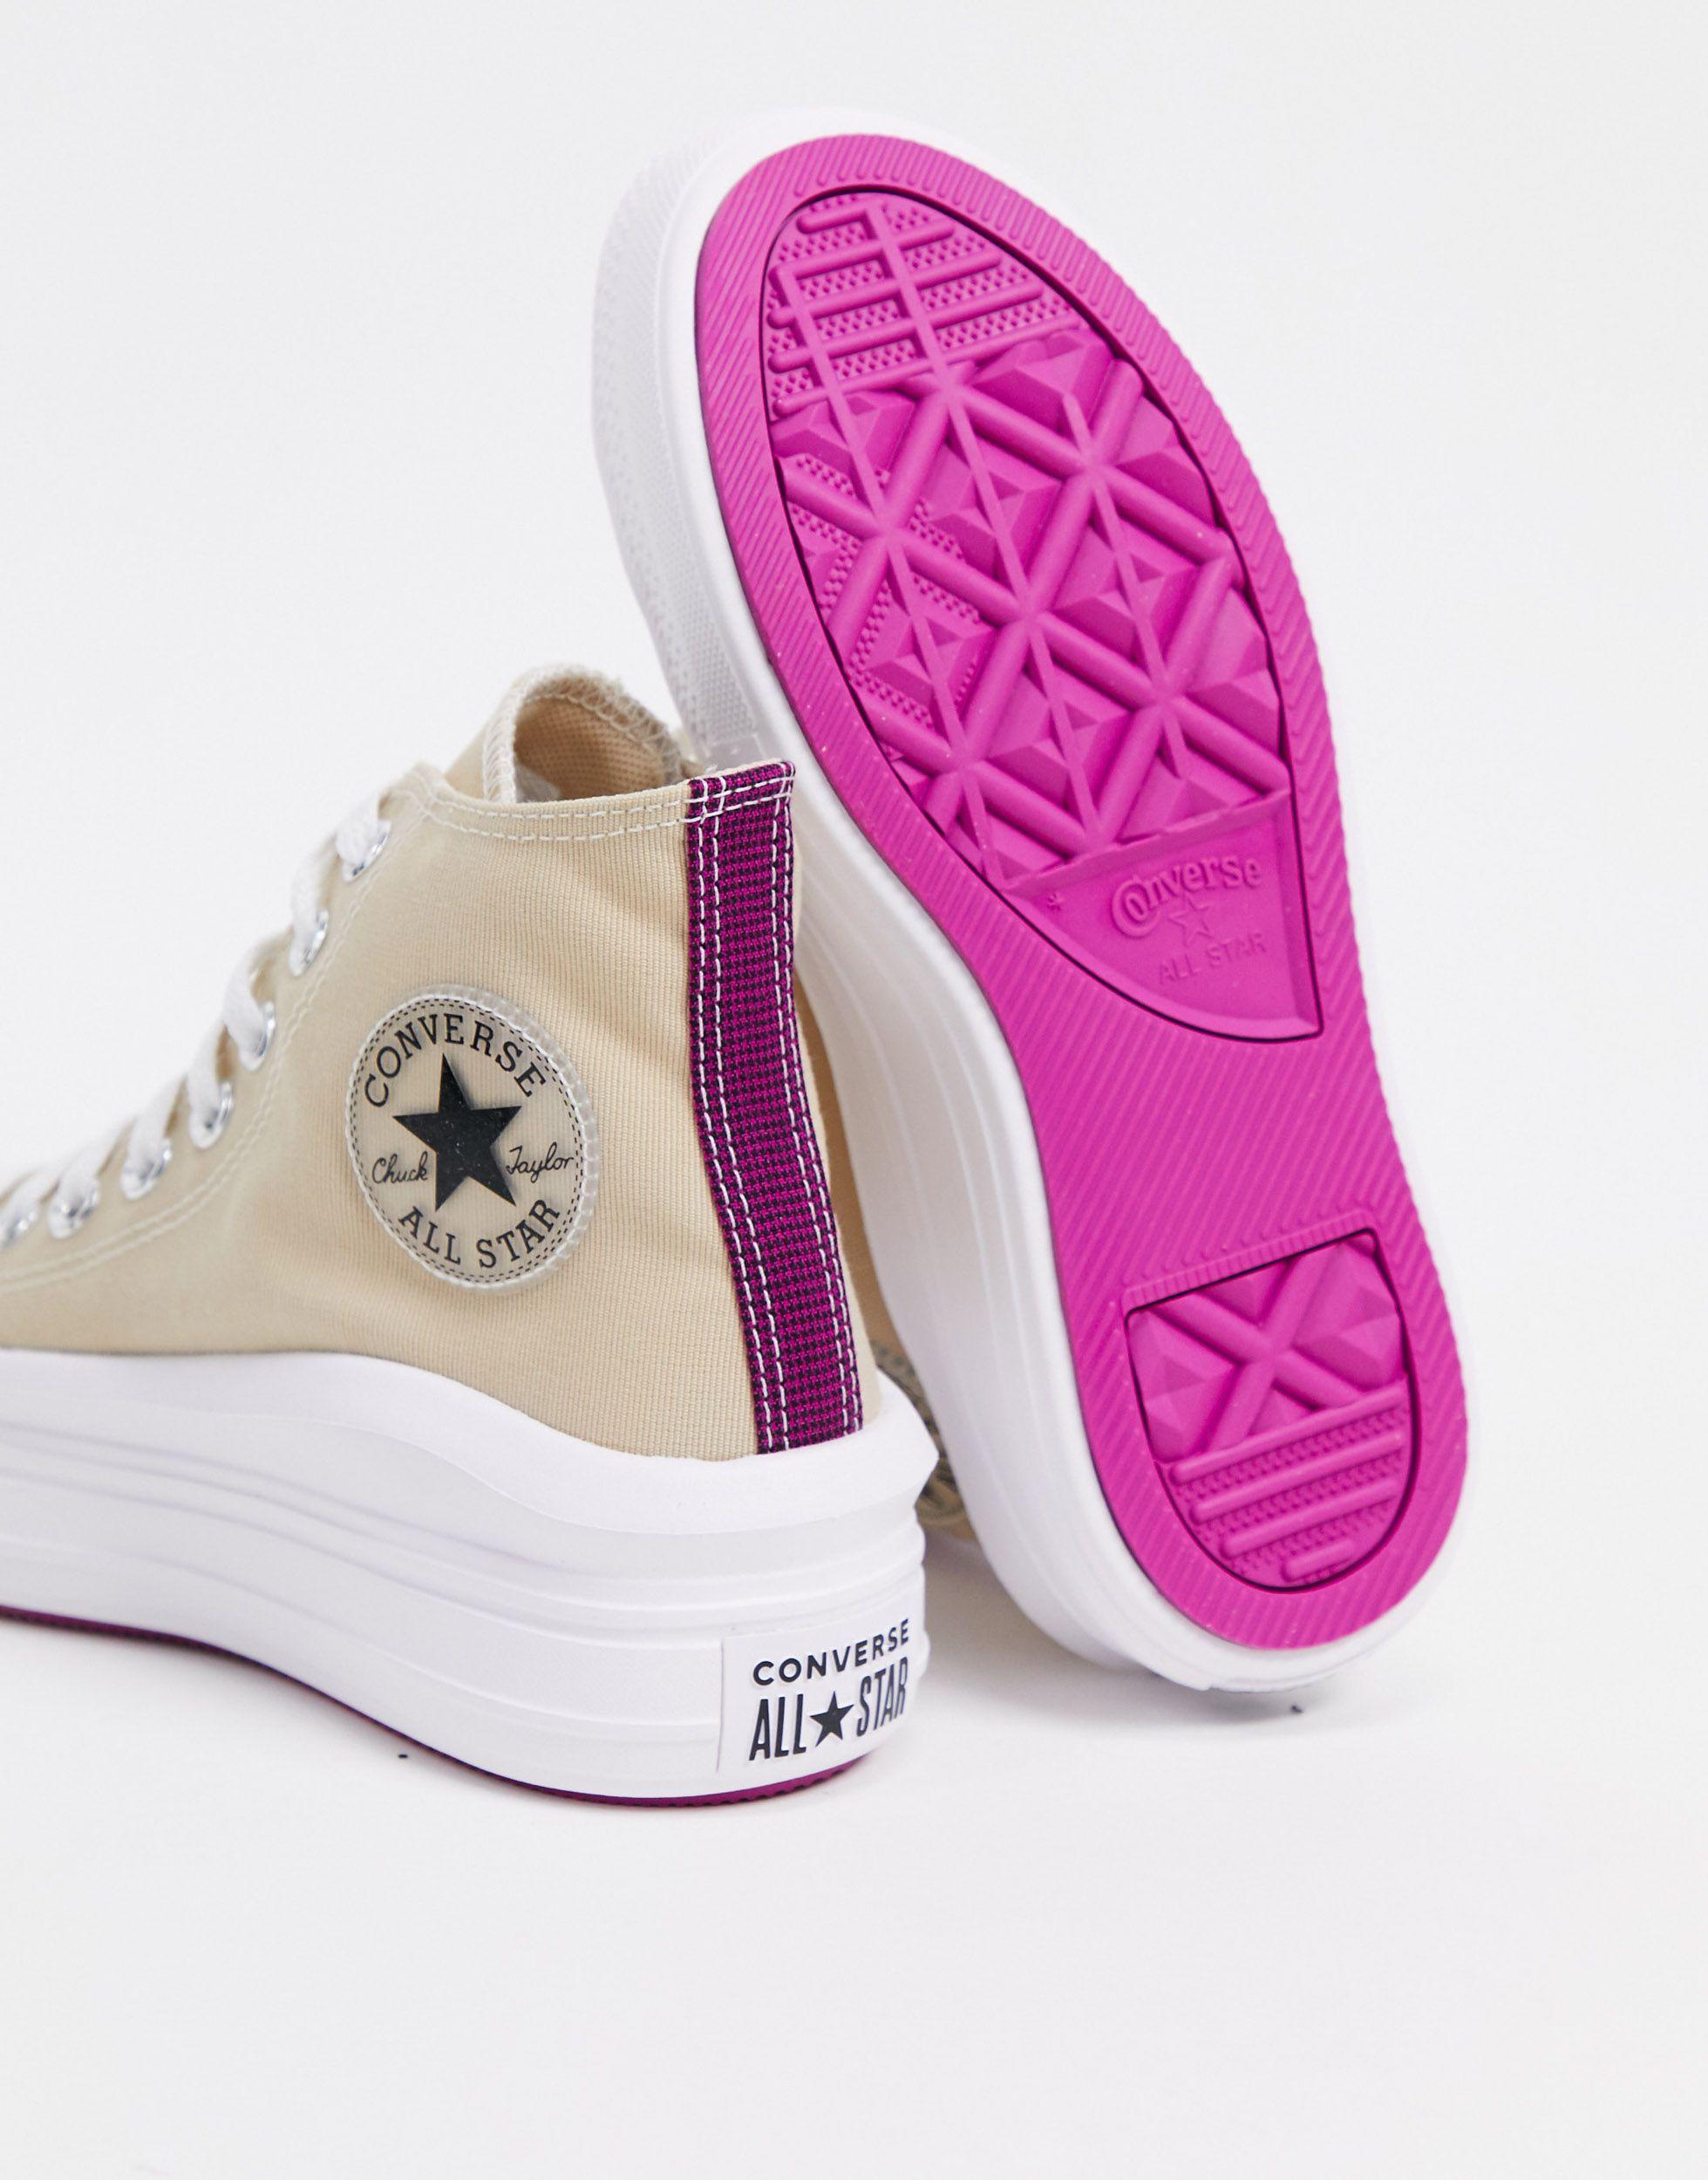 Converse Chuck Taylor All Star Move Hi-top Trainers in Natural | Lyst